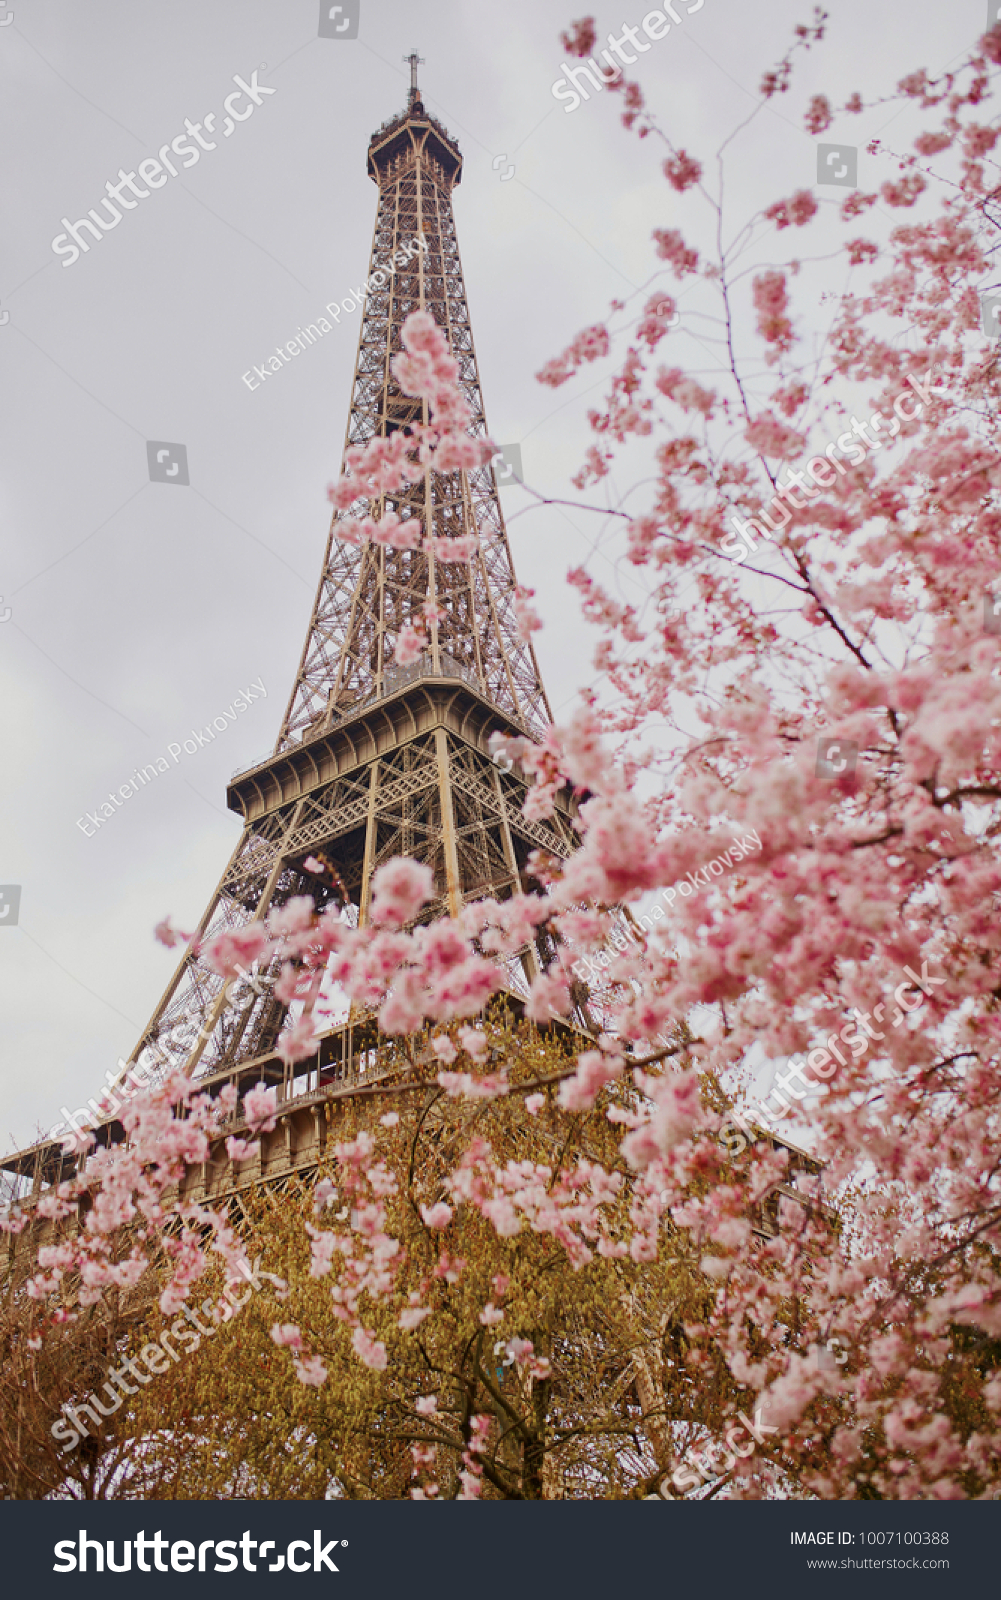 937 Eiffel Tower In Cherry Blossom Images Stock Photos And Vectors